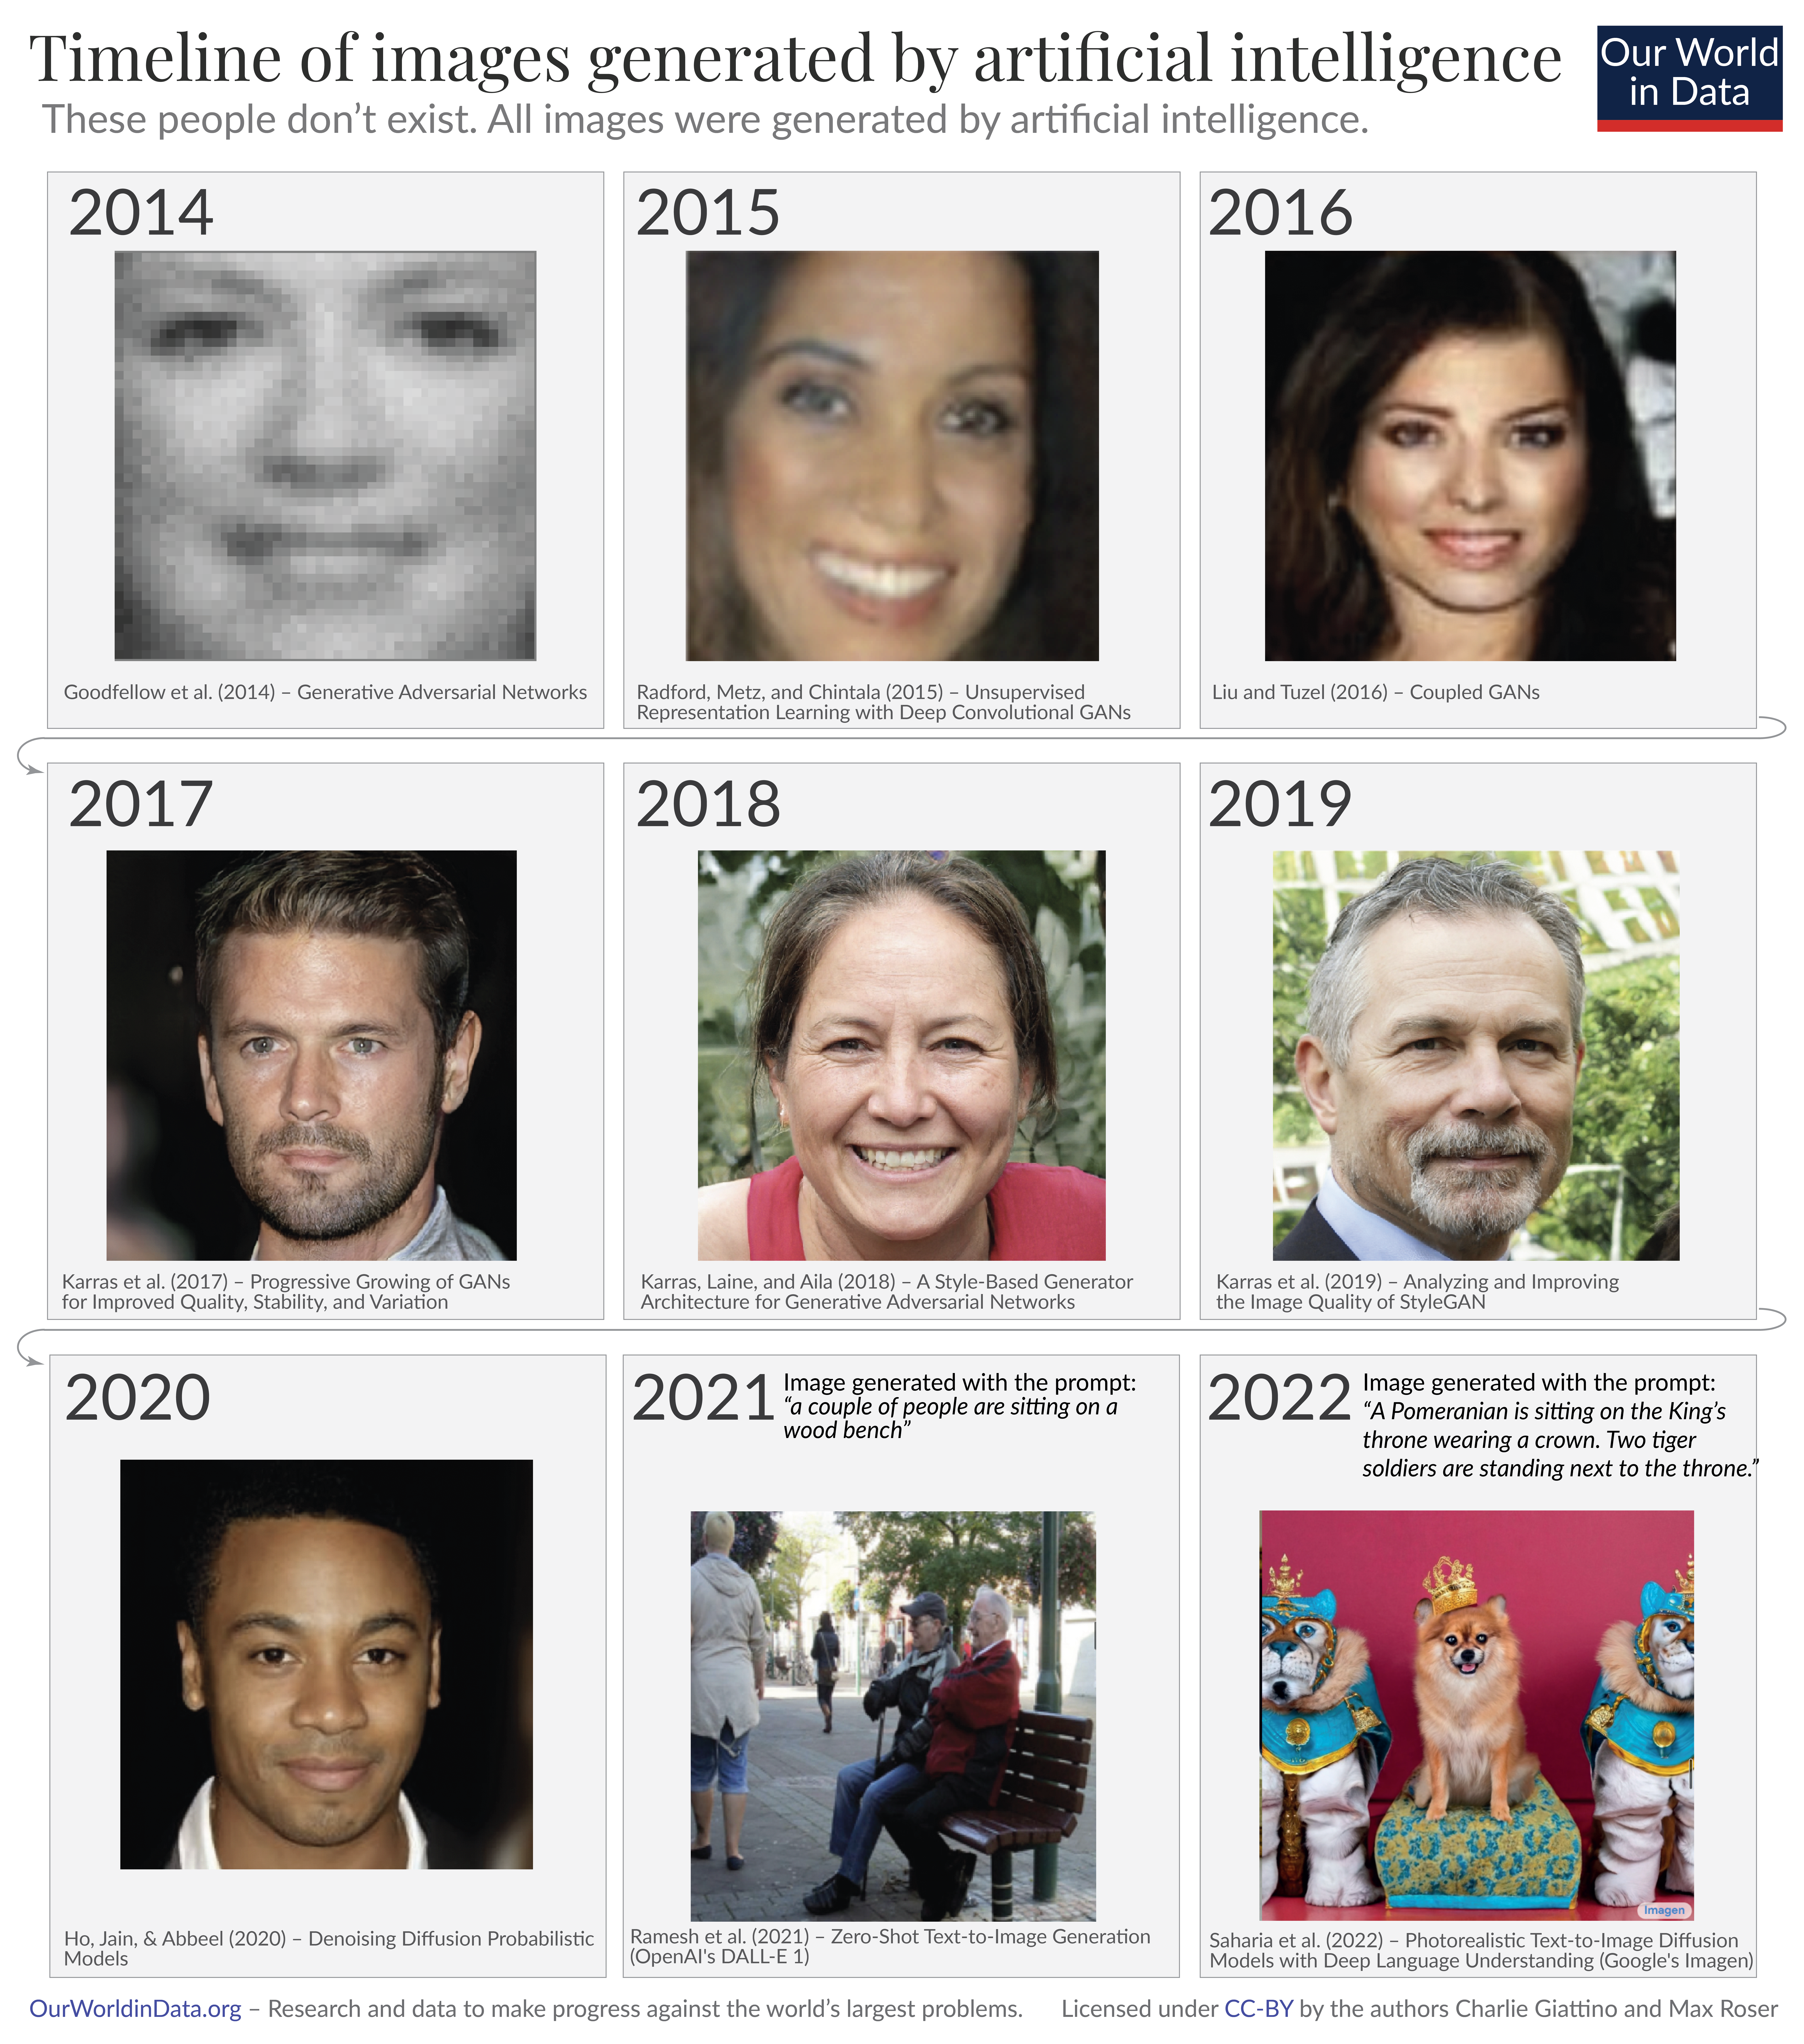 Timeline of images generated by artificial intelligence